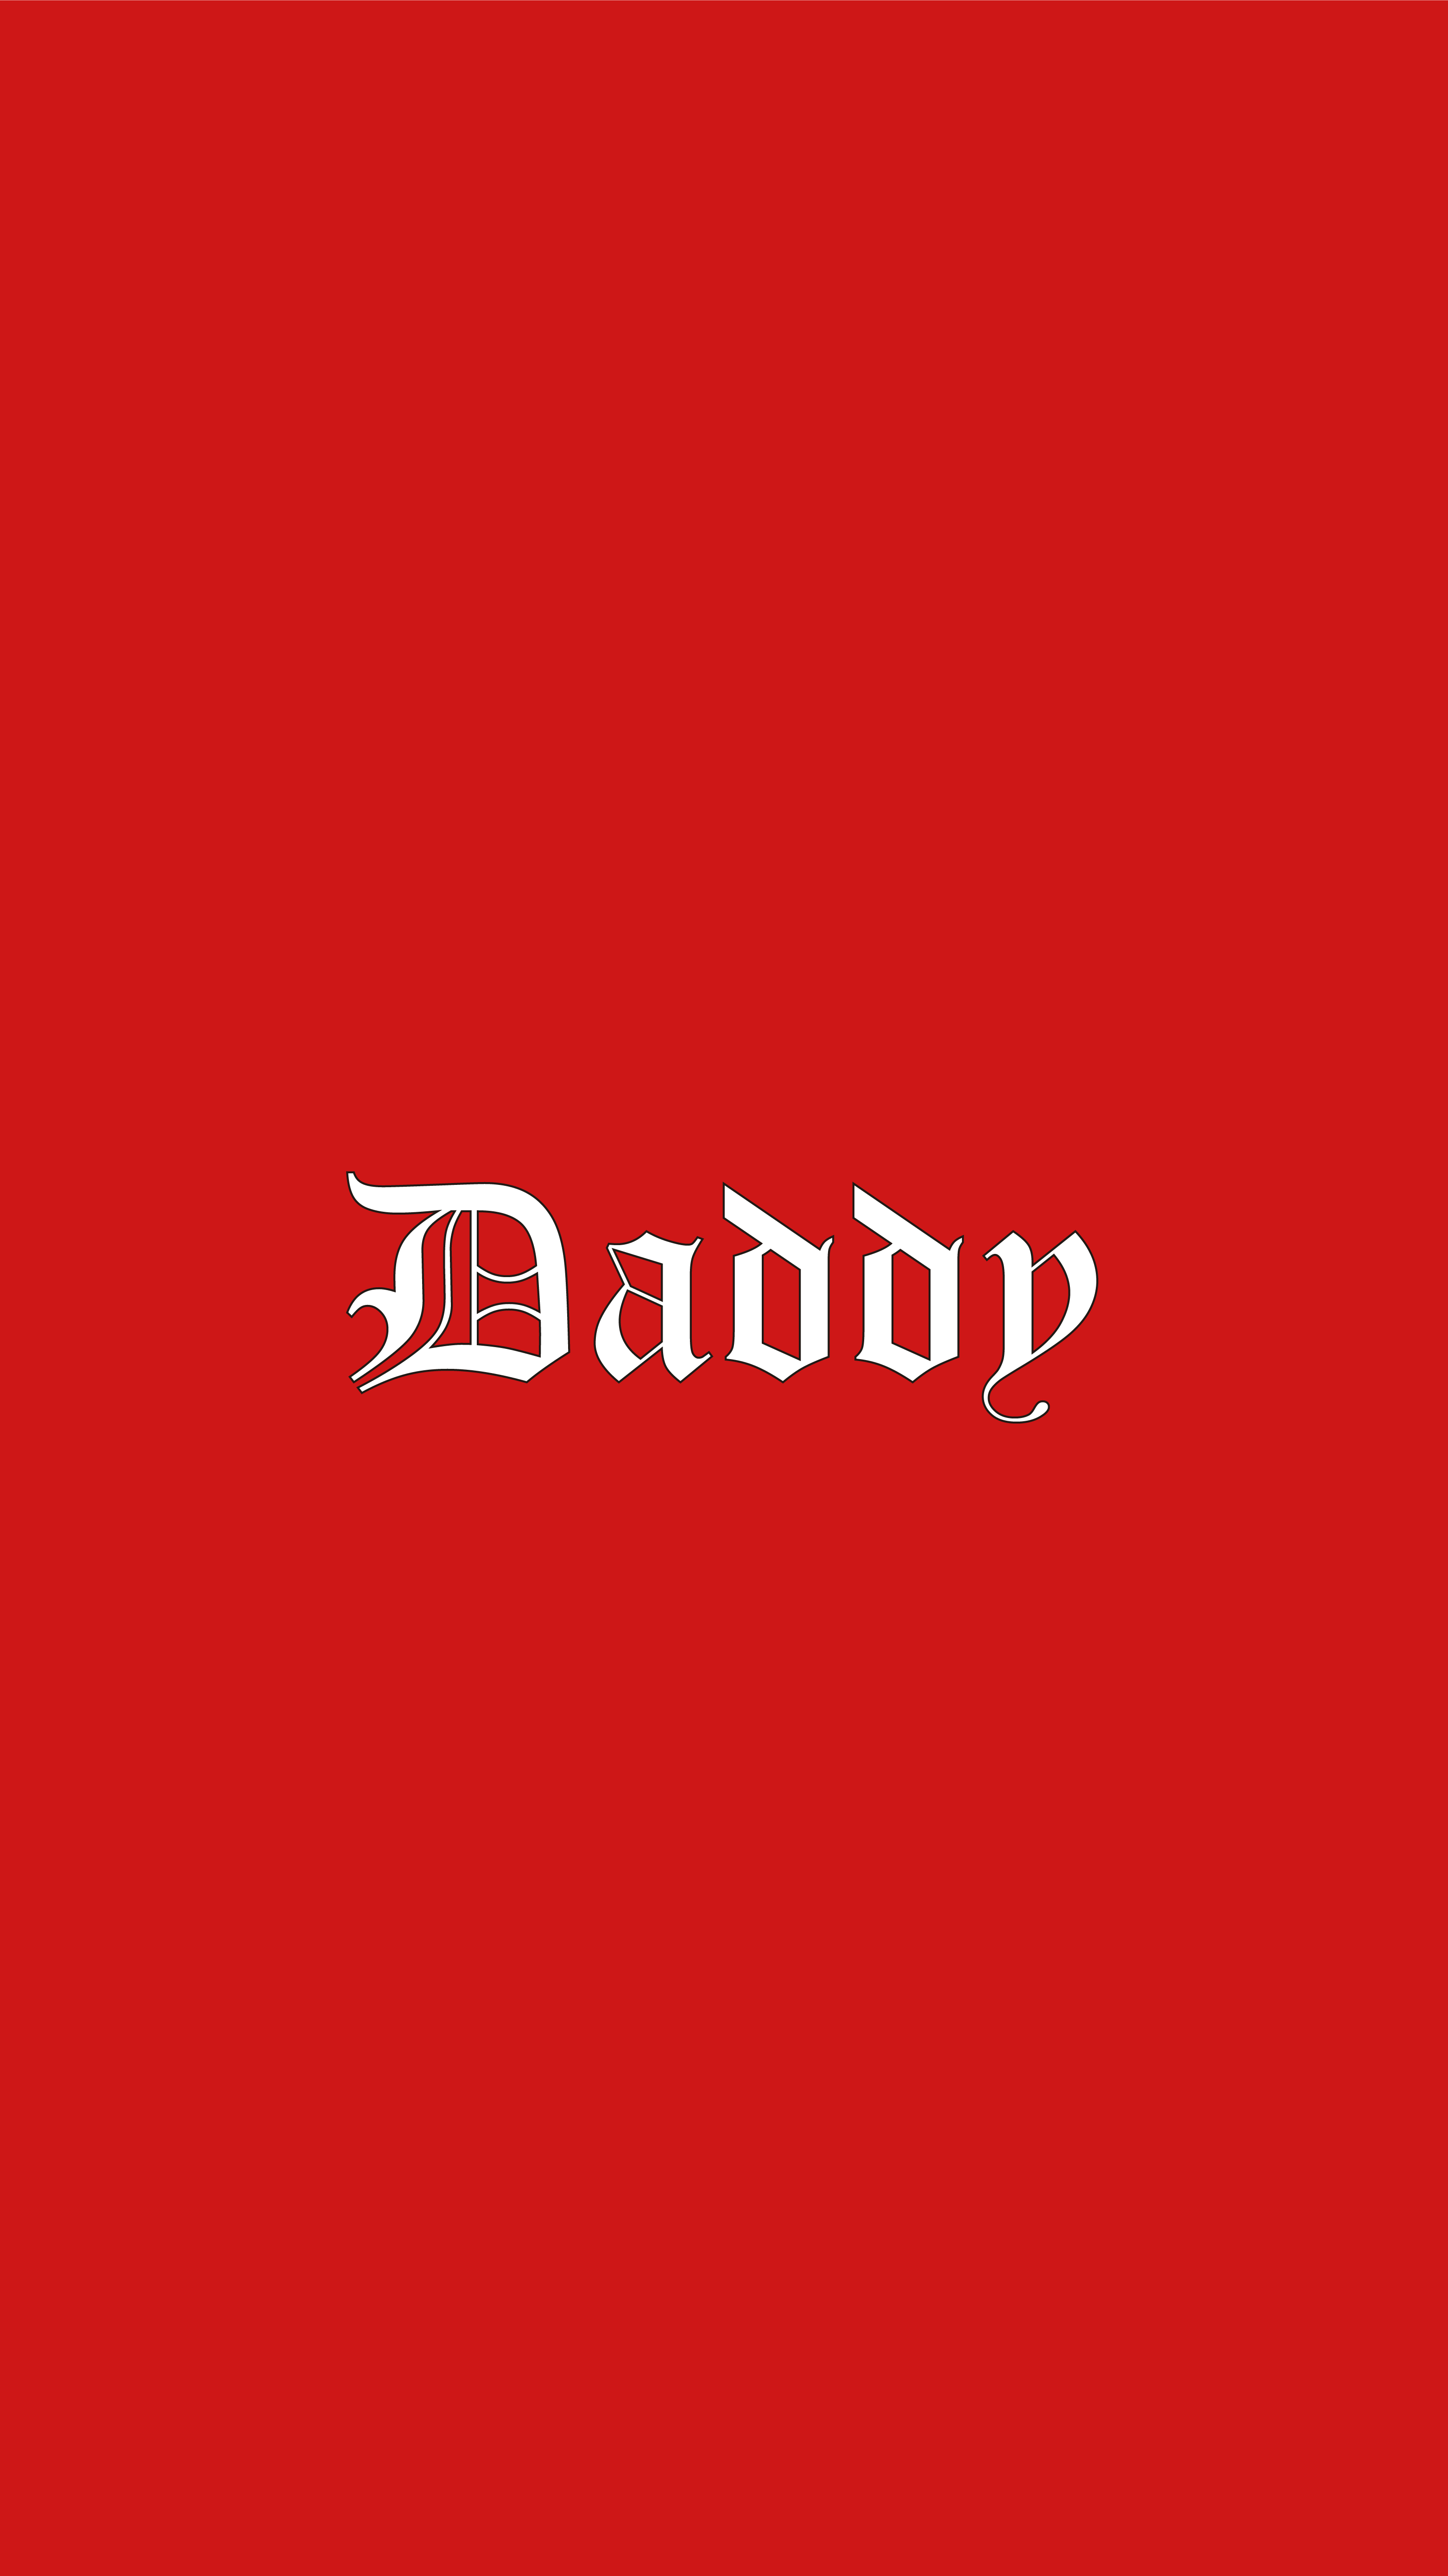 Daddy Wallpapers